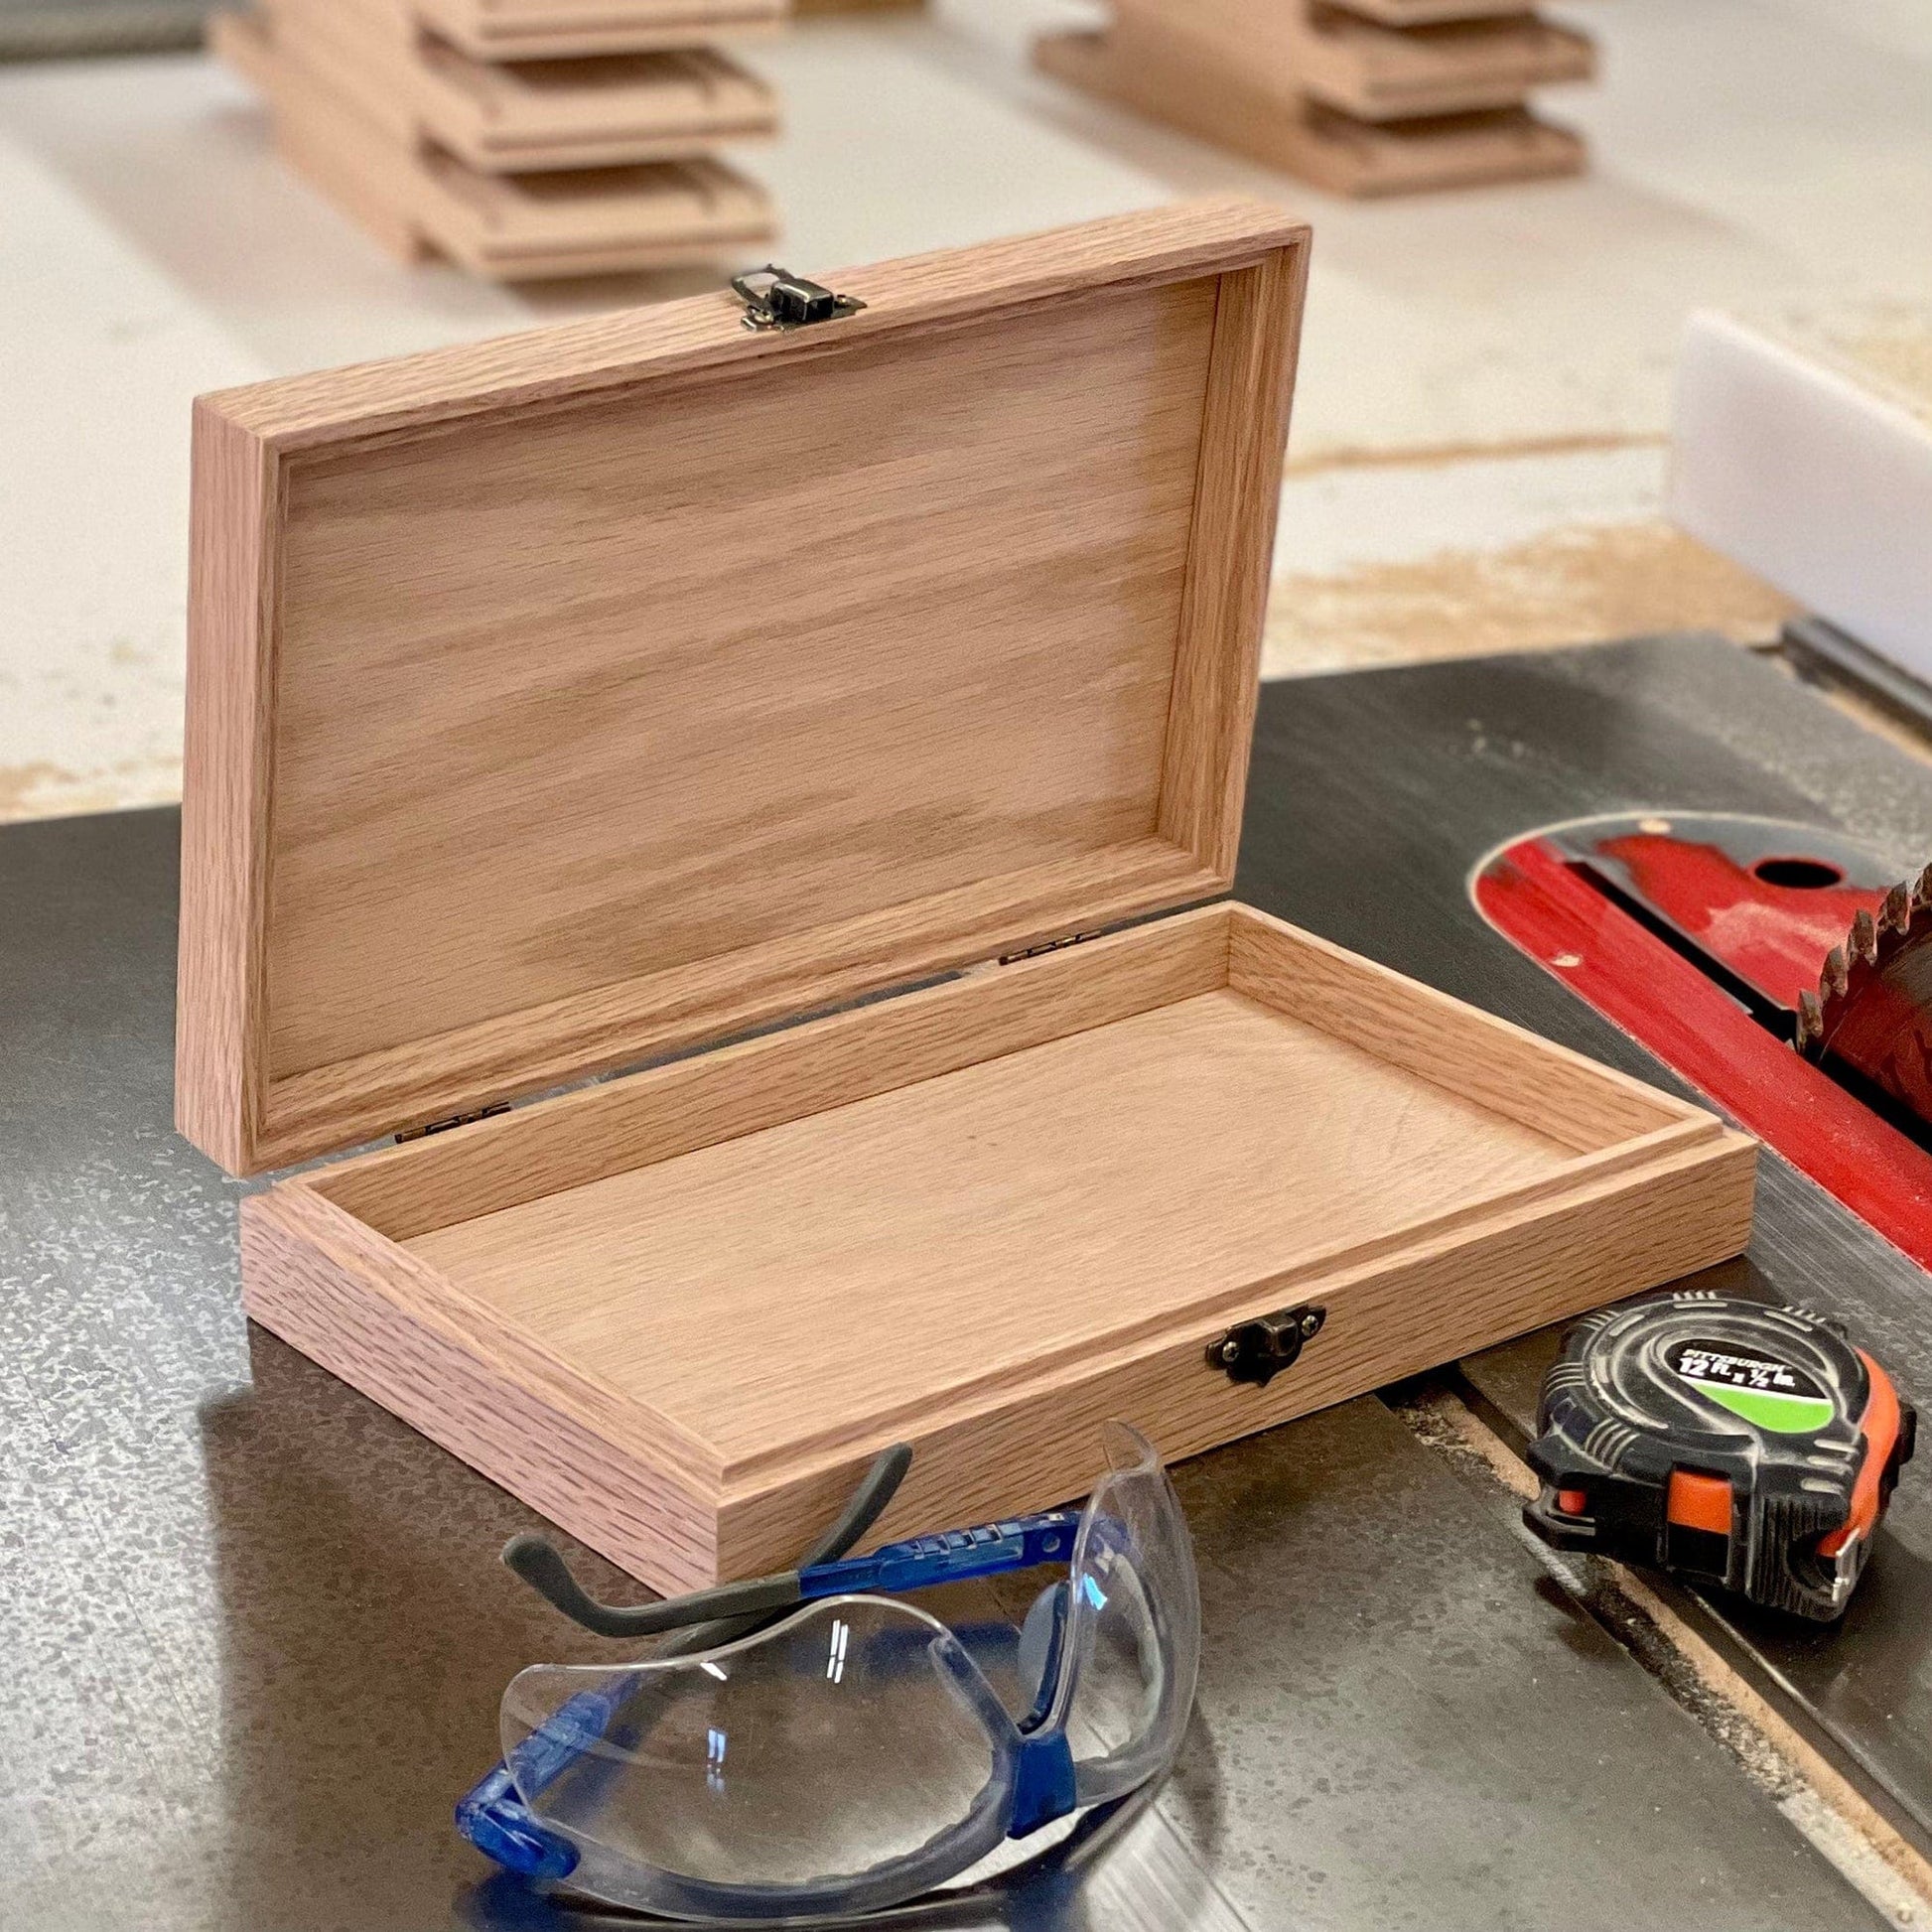 9 x 12 Cherry Wood Storage Crate / Tray - with Lid